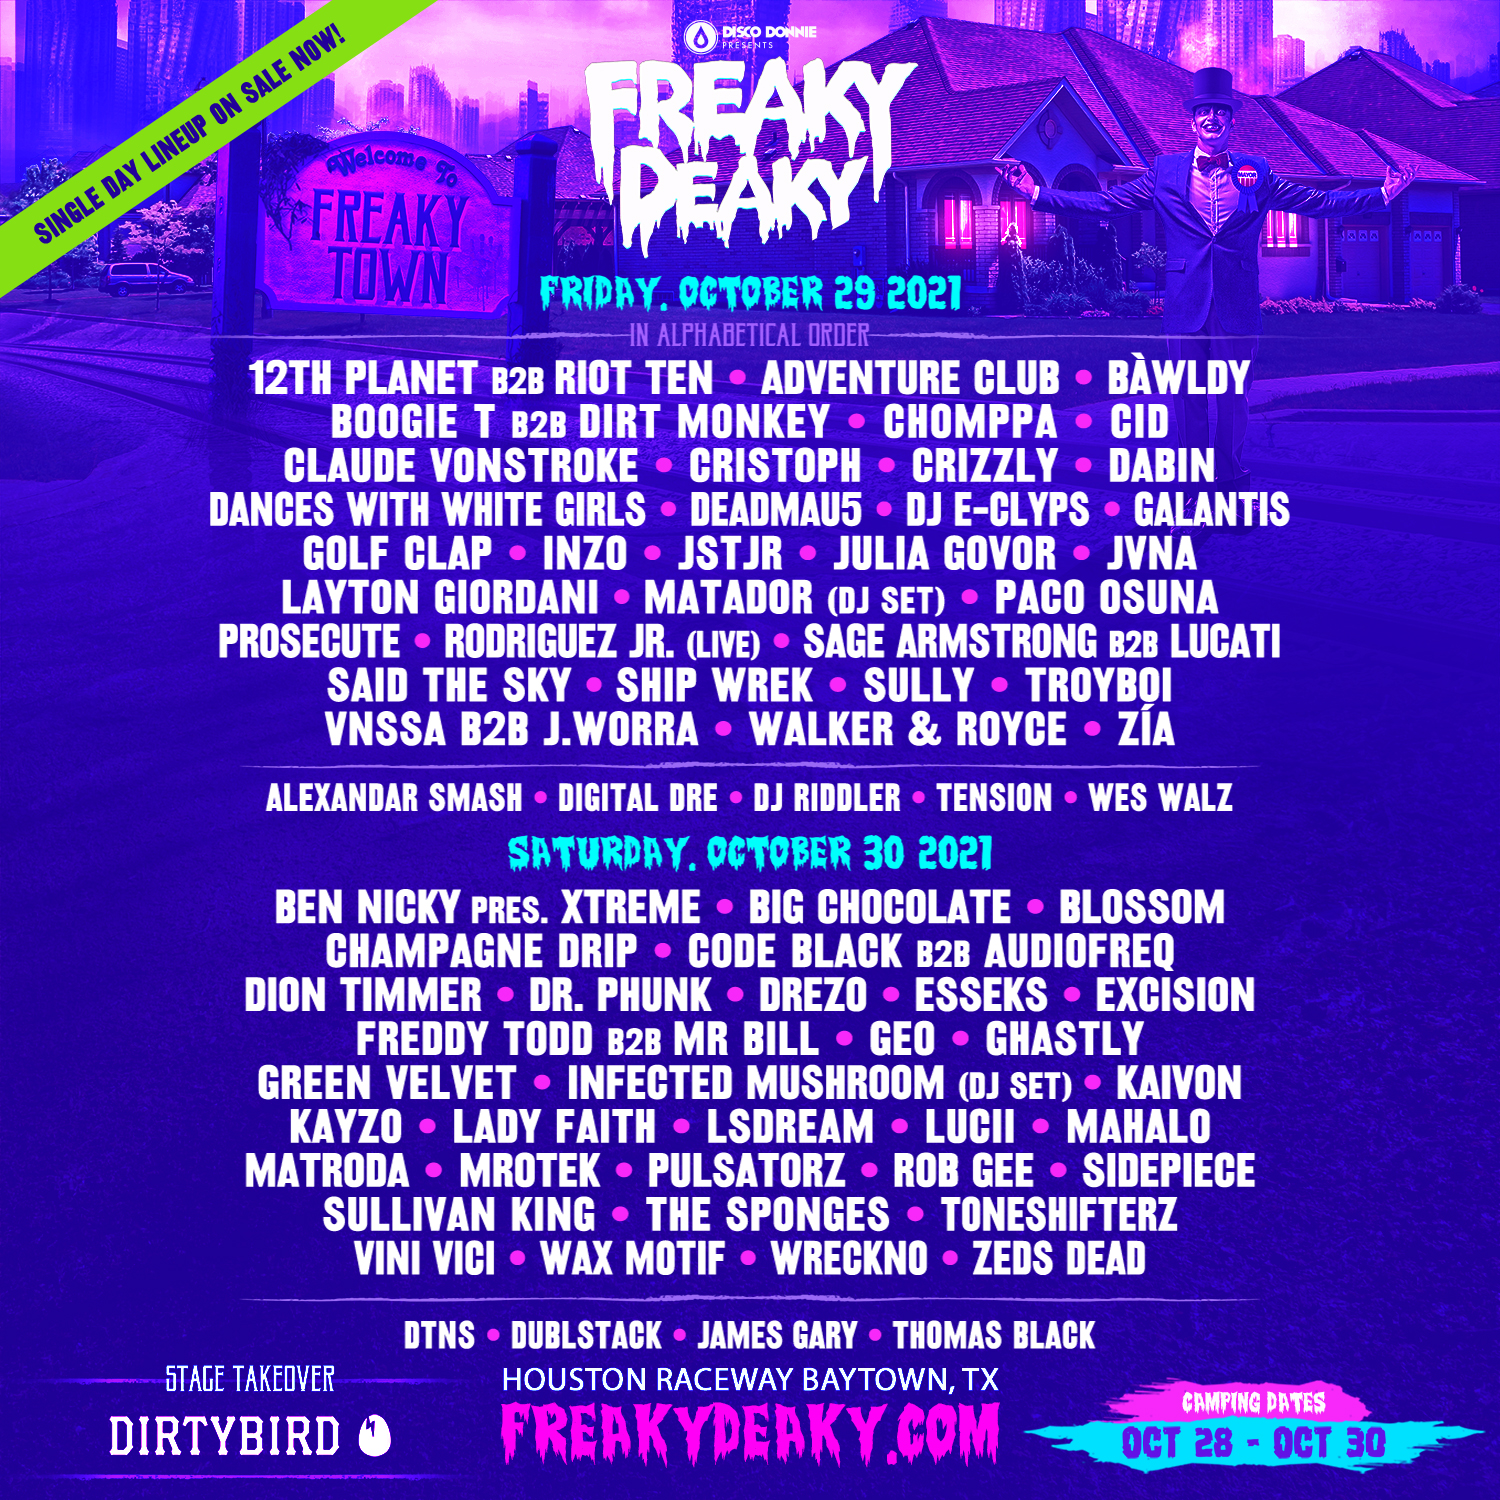 Buy Tickets To Freaky Deaky Texas 2021 In Baytown On Oct 28 2021 Oct 30 2021